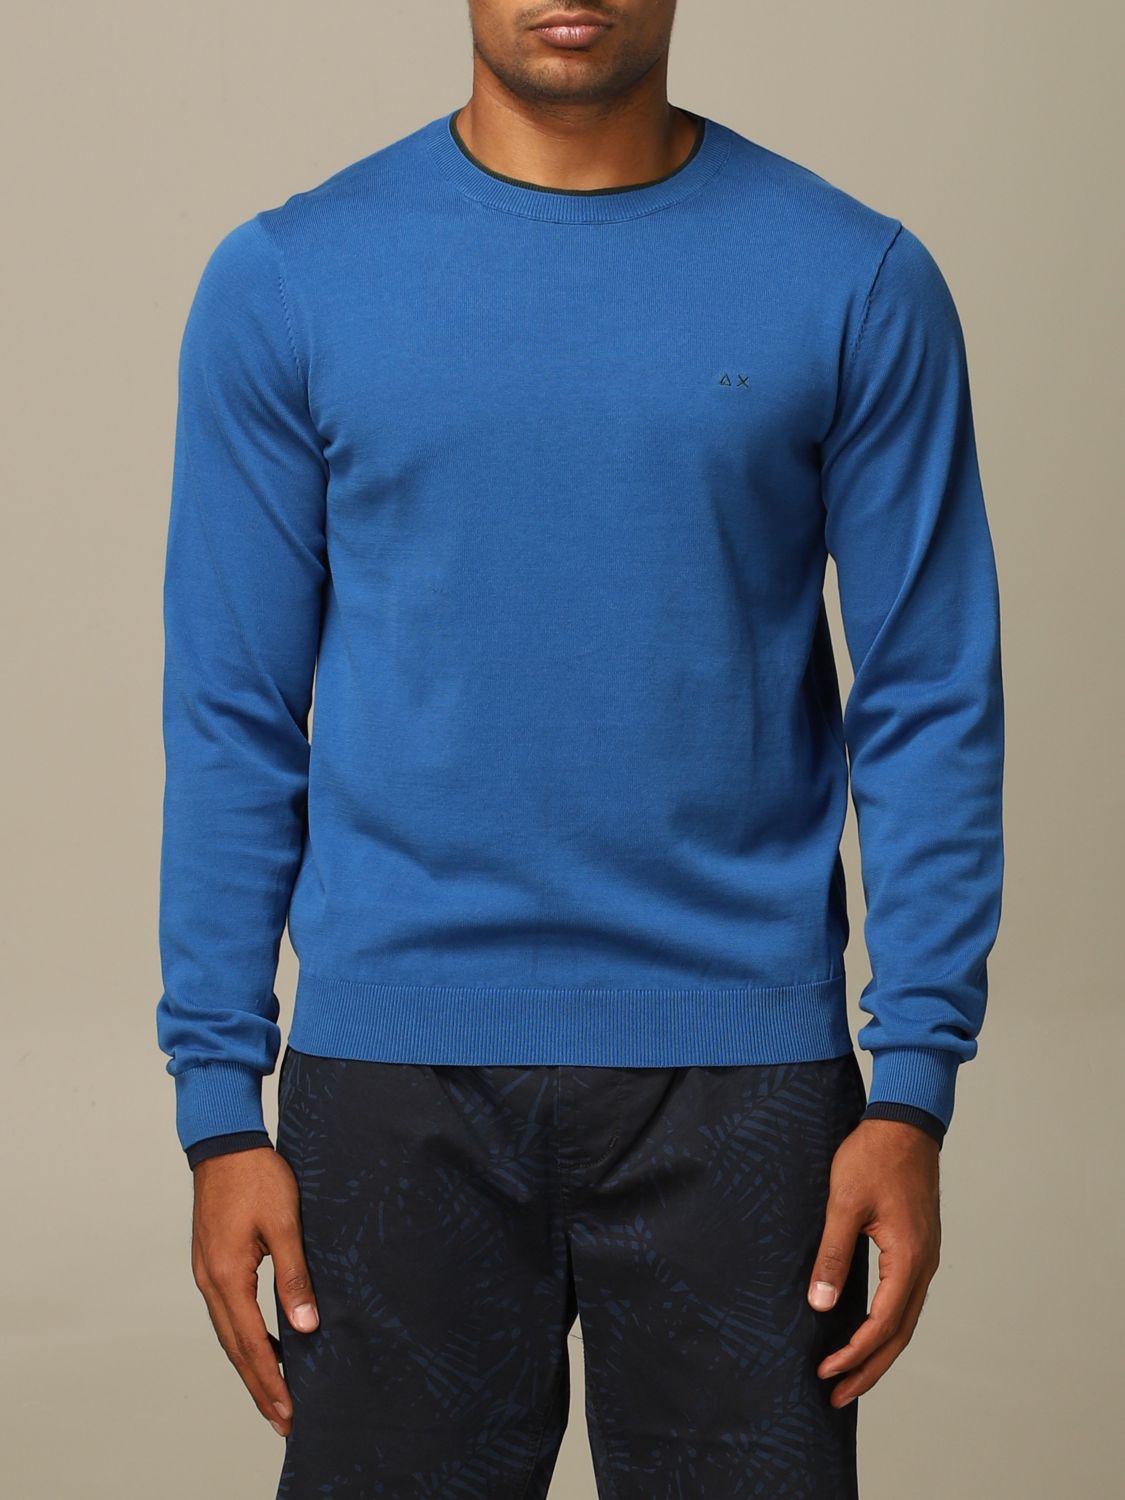 Sun 68 Outlet: sweater with long-sleeved logo - Royal Blue | Sweater